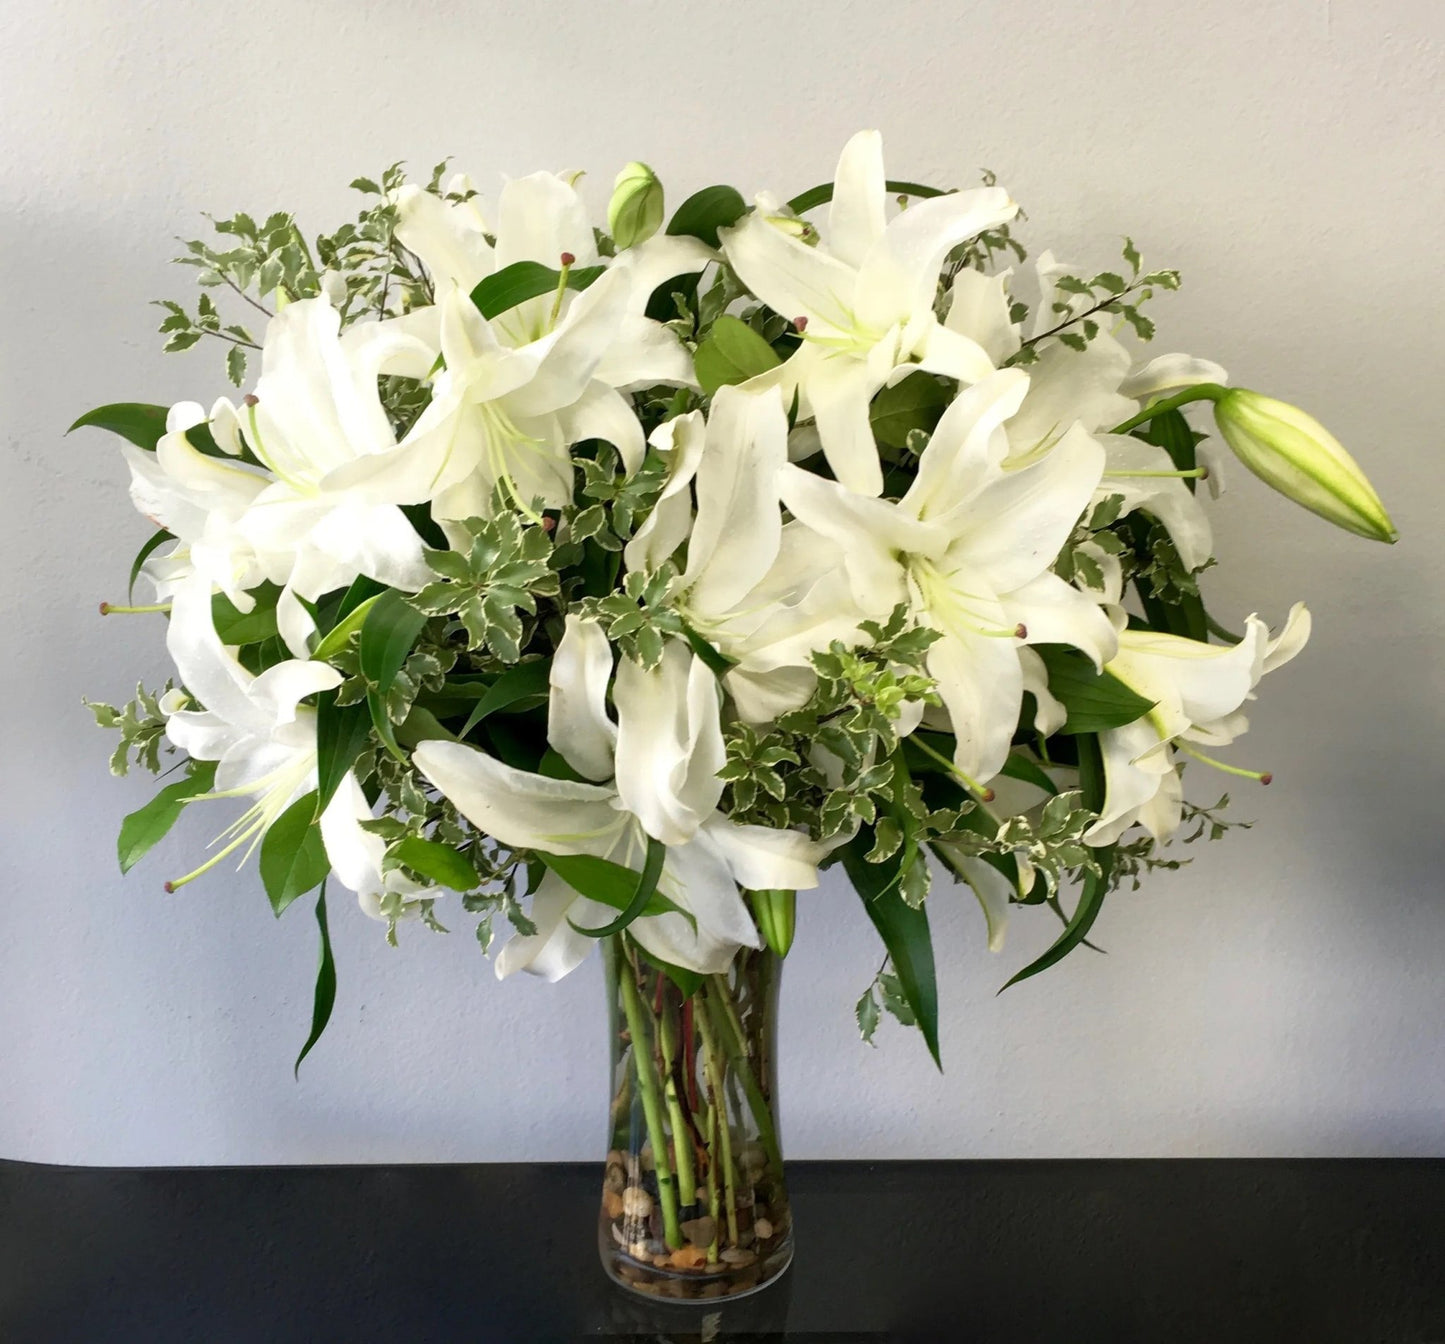 Blooming Lilies in a Vase